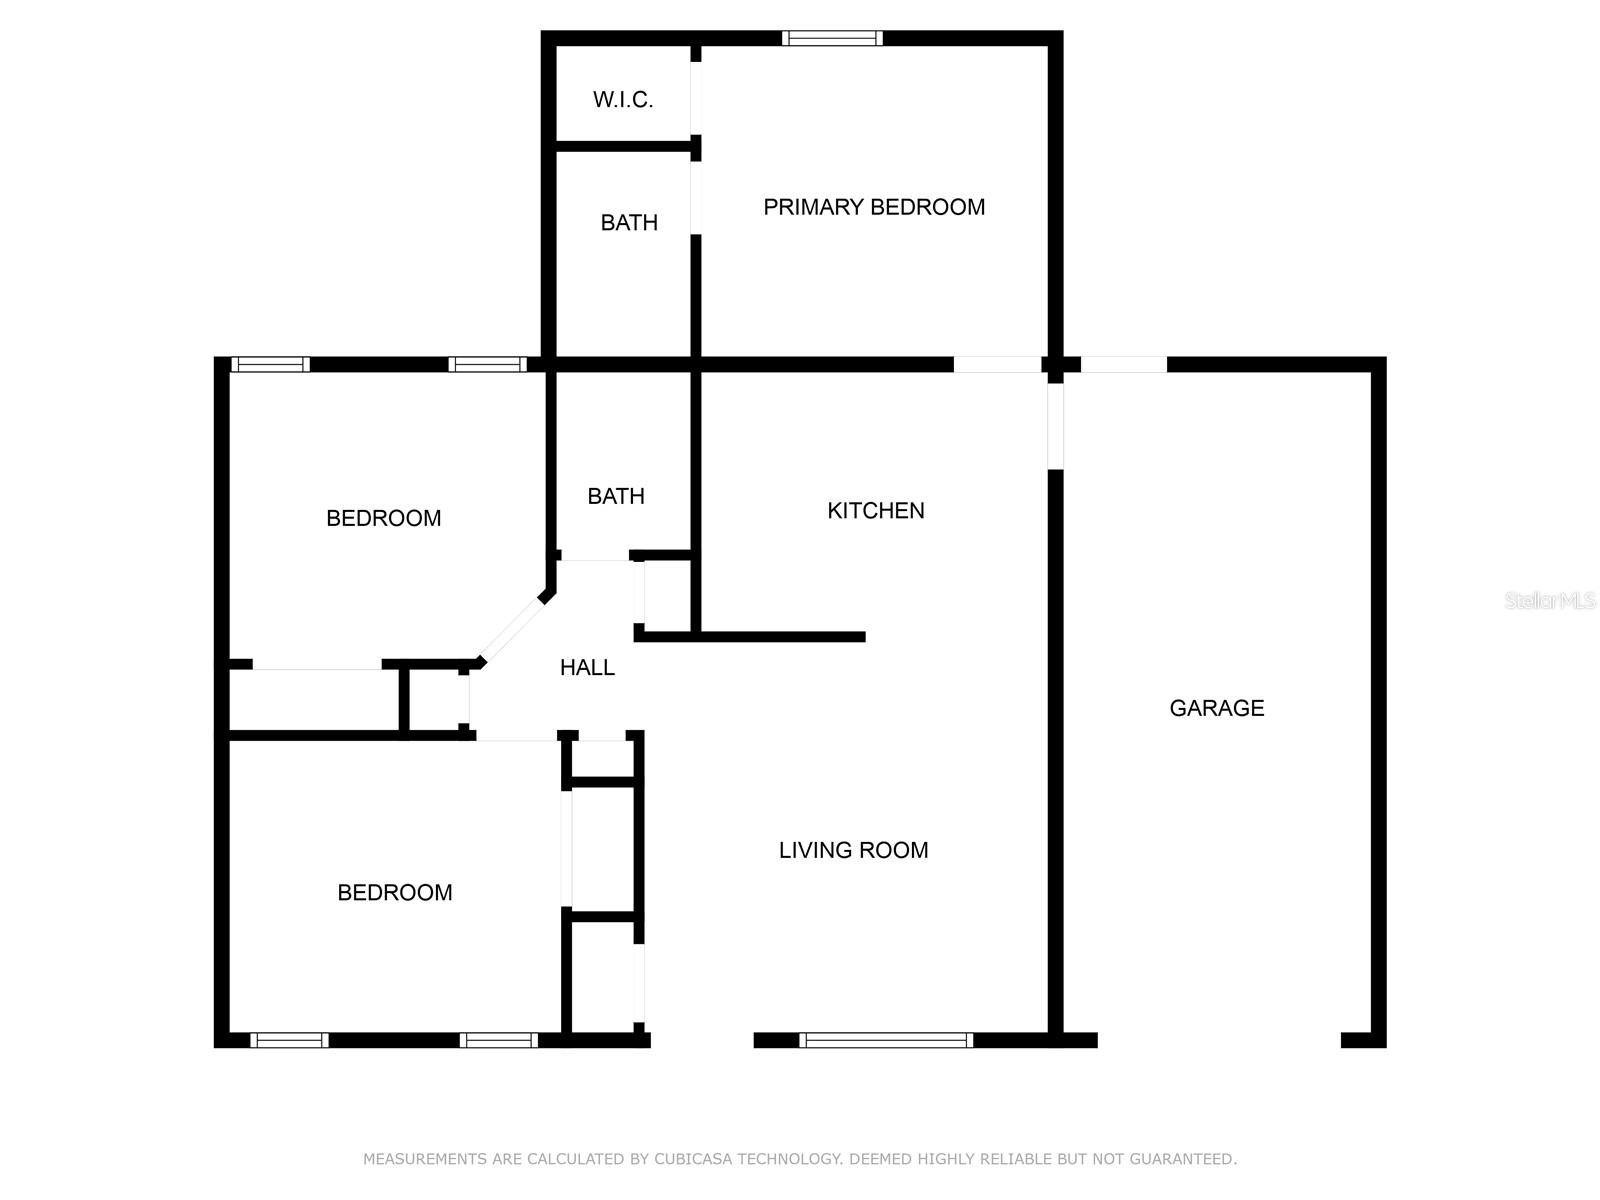 Floorplan of the house at 3544 Murrow St